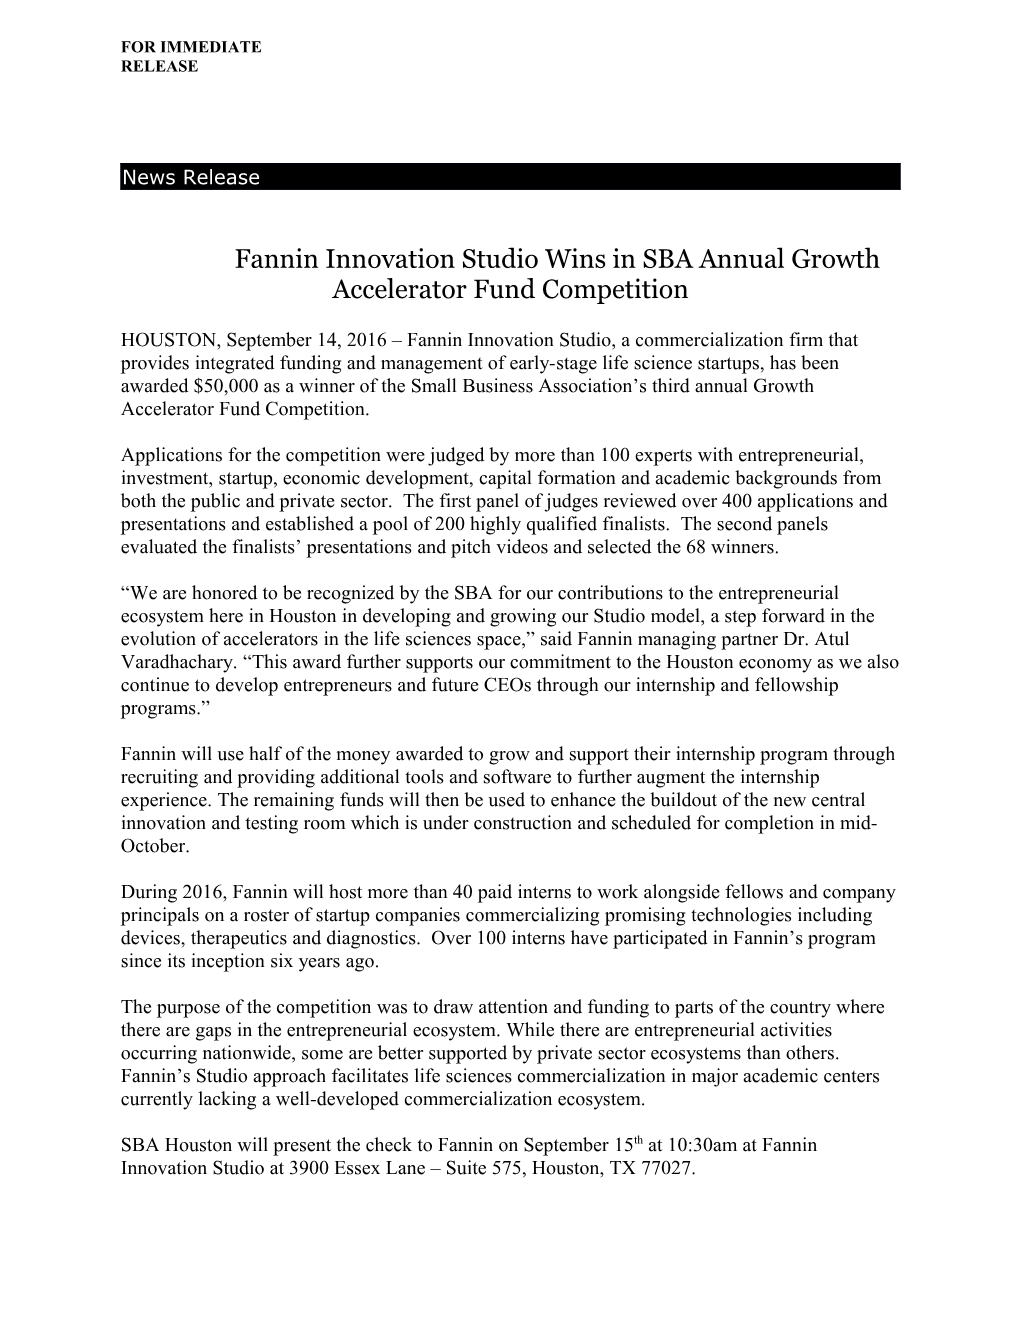 Fannin Innovation Studio Wins in SBA Annual Growth Accelerator Fund Competition